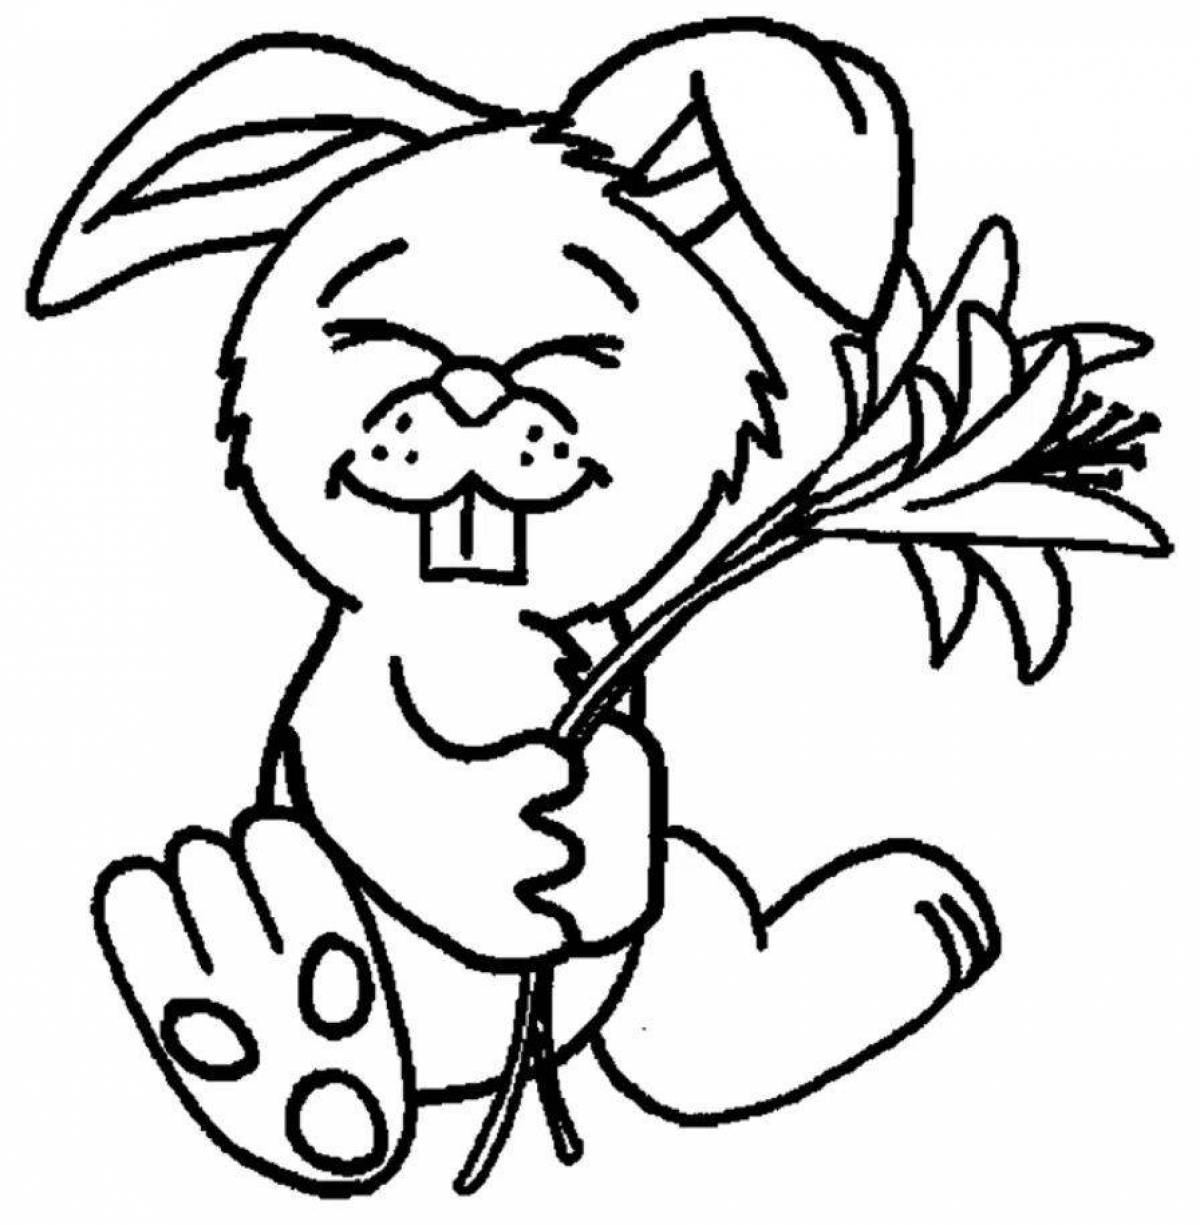 Coloring book funny rabbit and cat